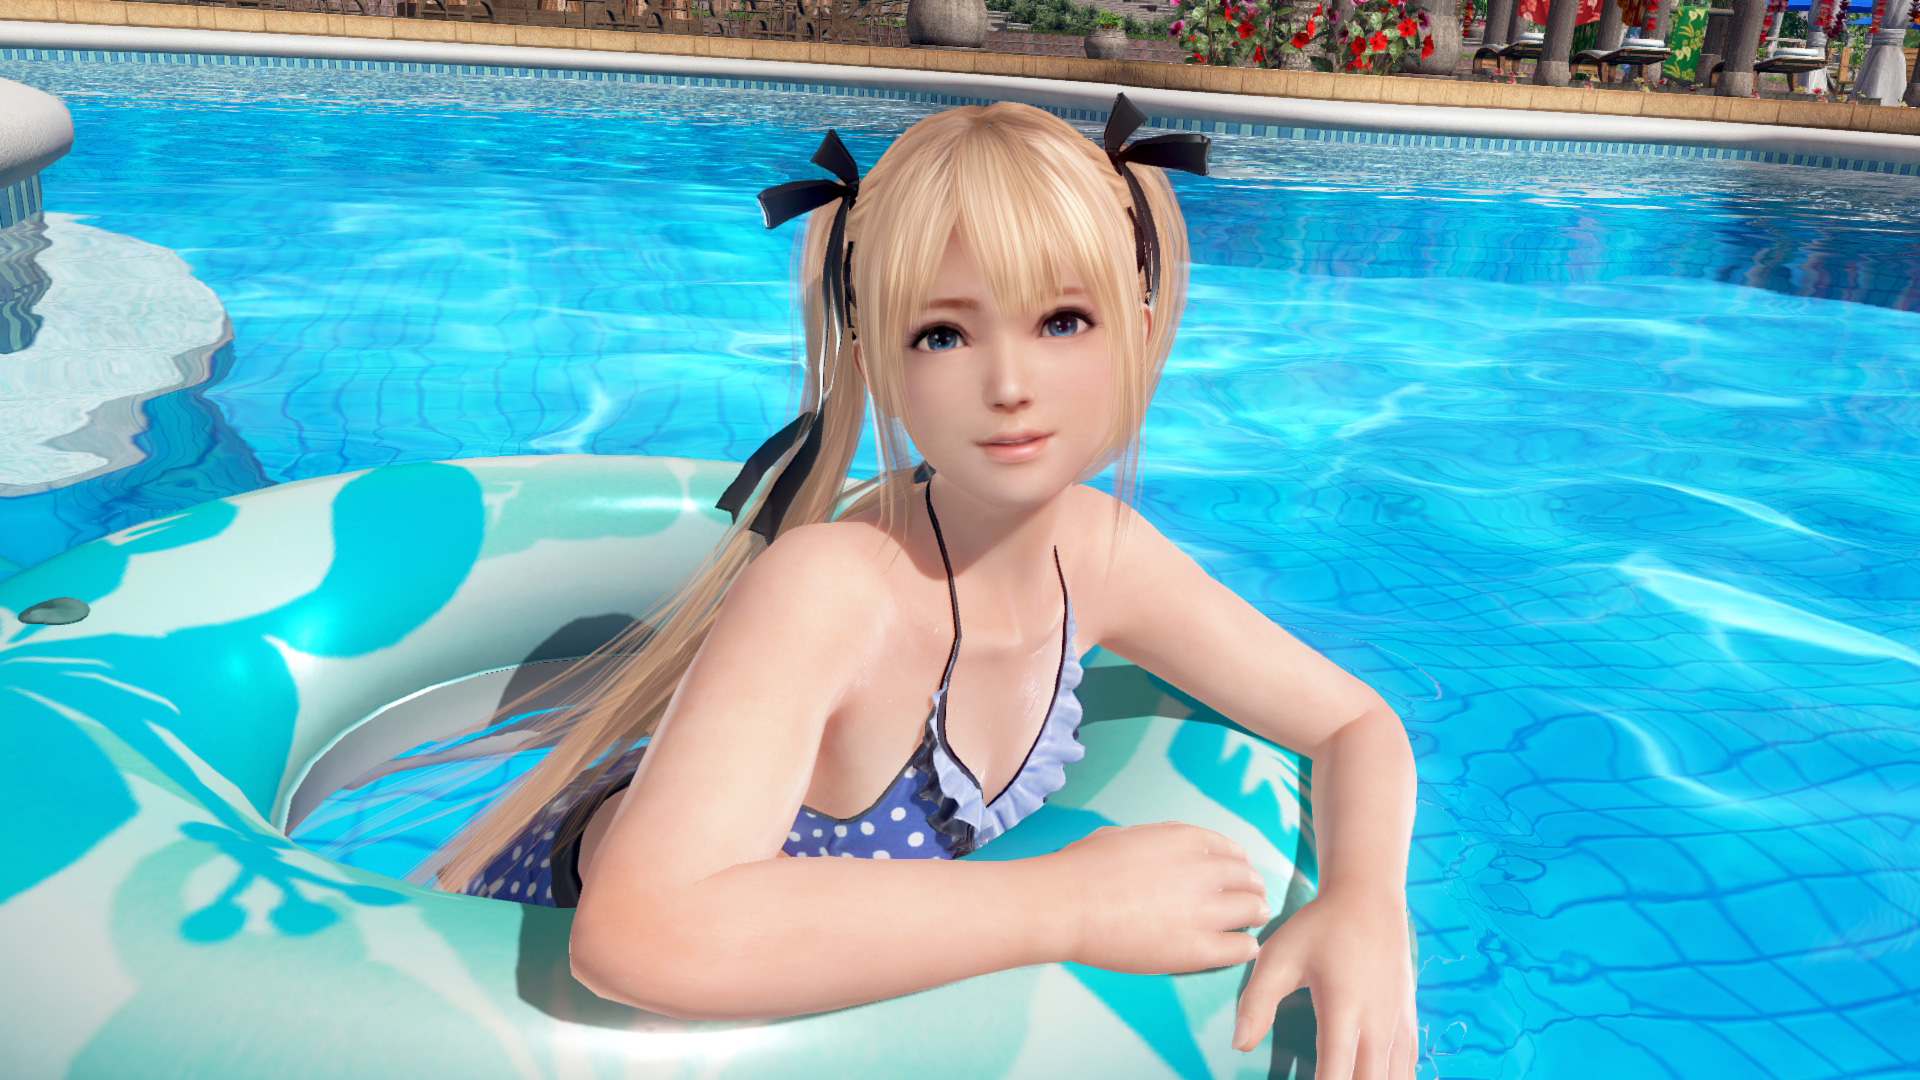 Dead Or Alive Xtreme 3